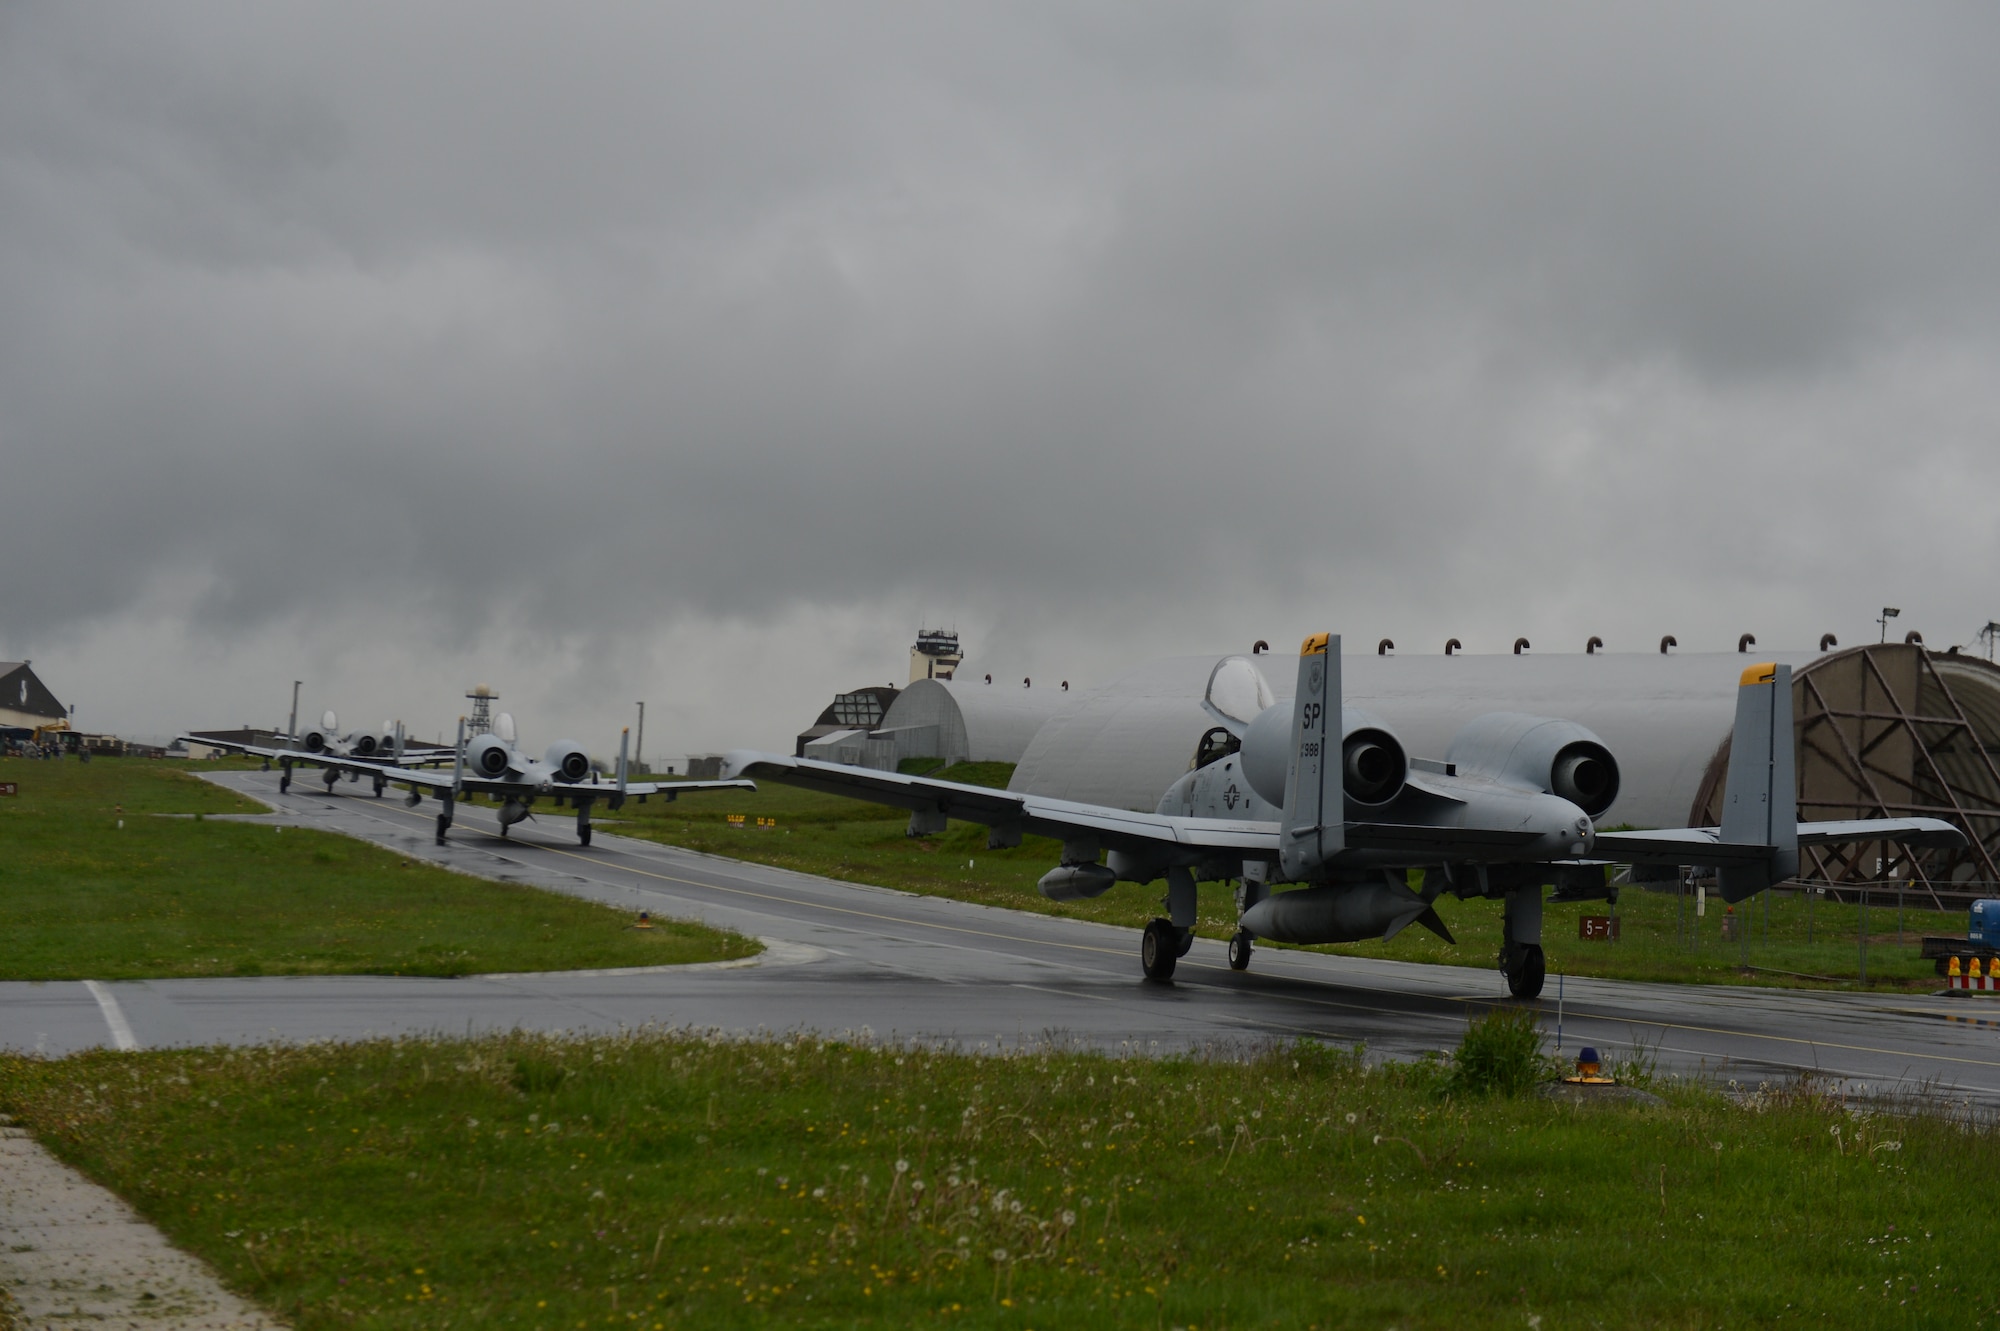 SPANGDAHLEM AIR BASE, Germany – U.S. Air Force A-10 Thunderbolt II attack aircraft assigned to the 81st Fighter Squadron takes off for the final time from Spangdahlem Air Base and Europe May 17, 2013. The squadron officially inactivates in June. Several A-10s will be reassigned to Davis-Monthan Air Force Base, Ariz. (U.S. Air Force photo by Airman 1st Class Gustavo Castillo/Released)  